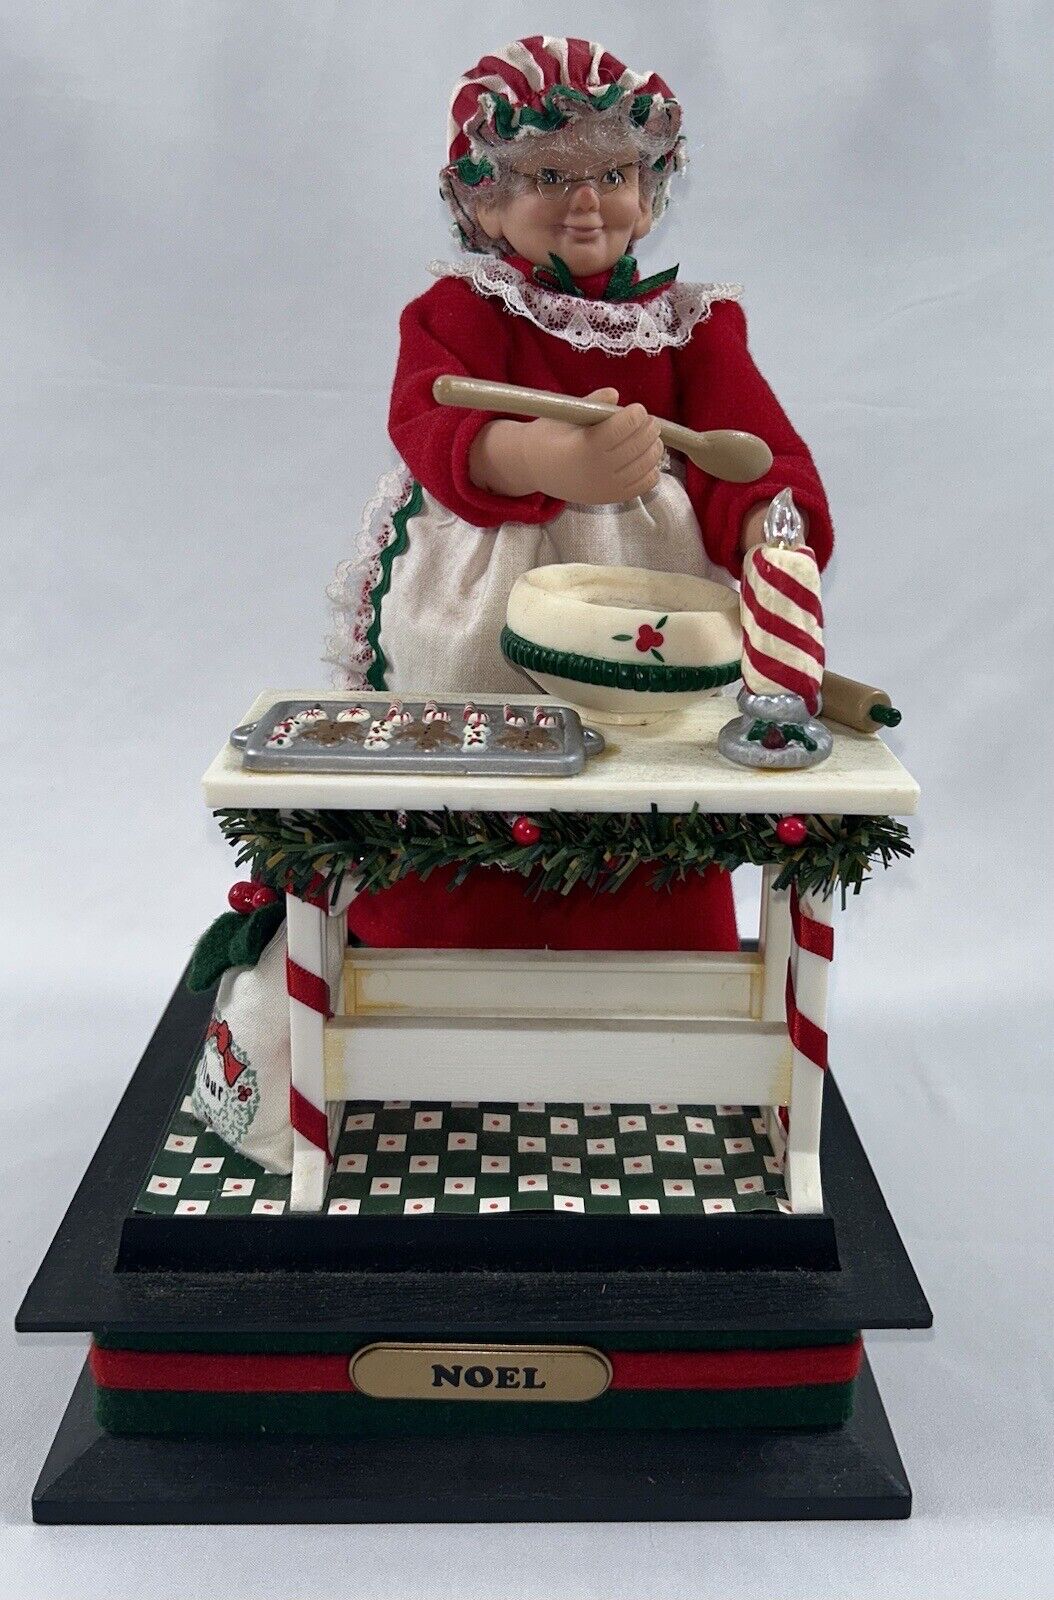 Christmas Mrs. Santa Claus Vintage Bake Cookies Holiday Creations Music/Lighted